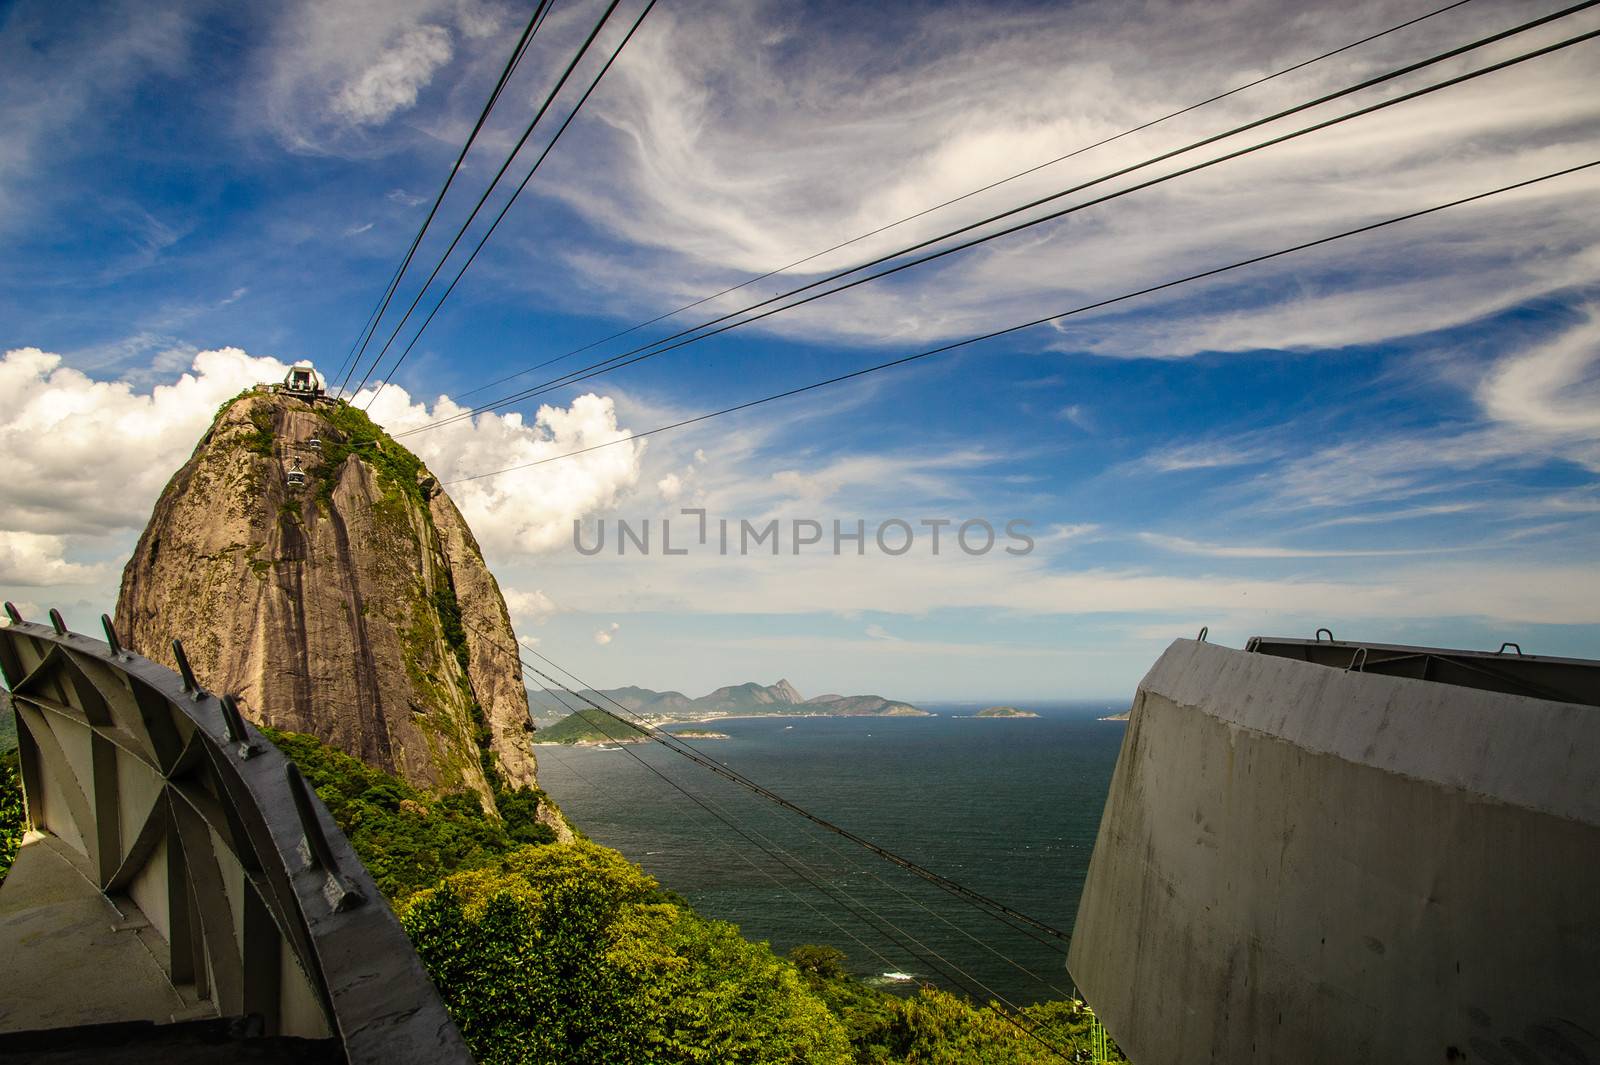 Cableway to Sugarloaf Mountain by CelsoDiniz